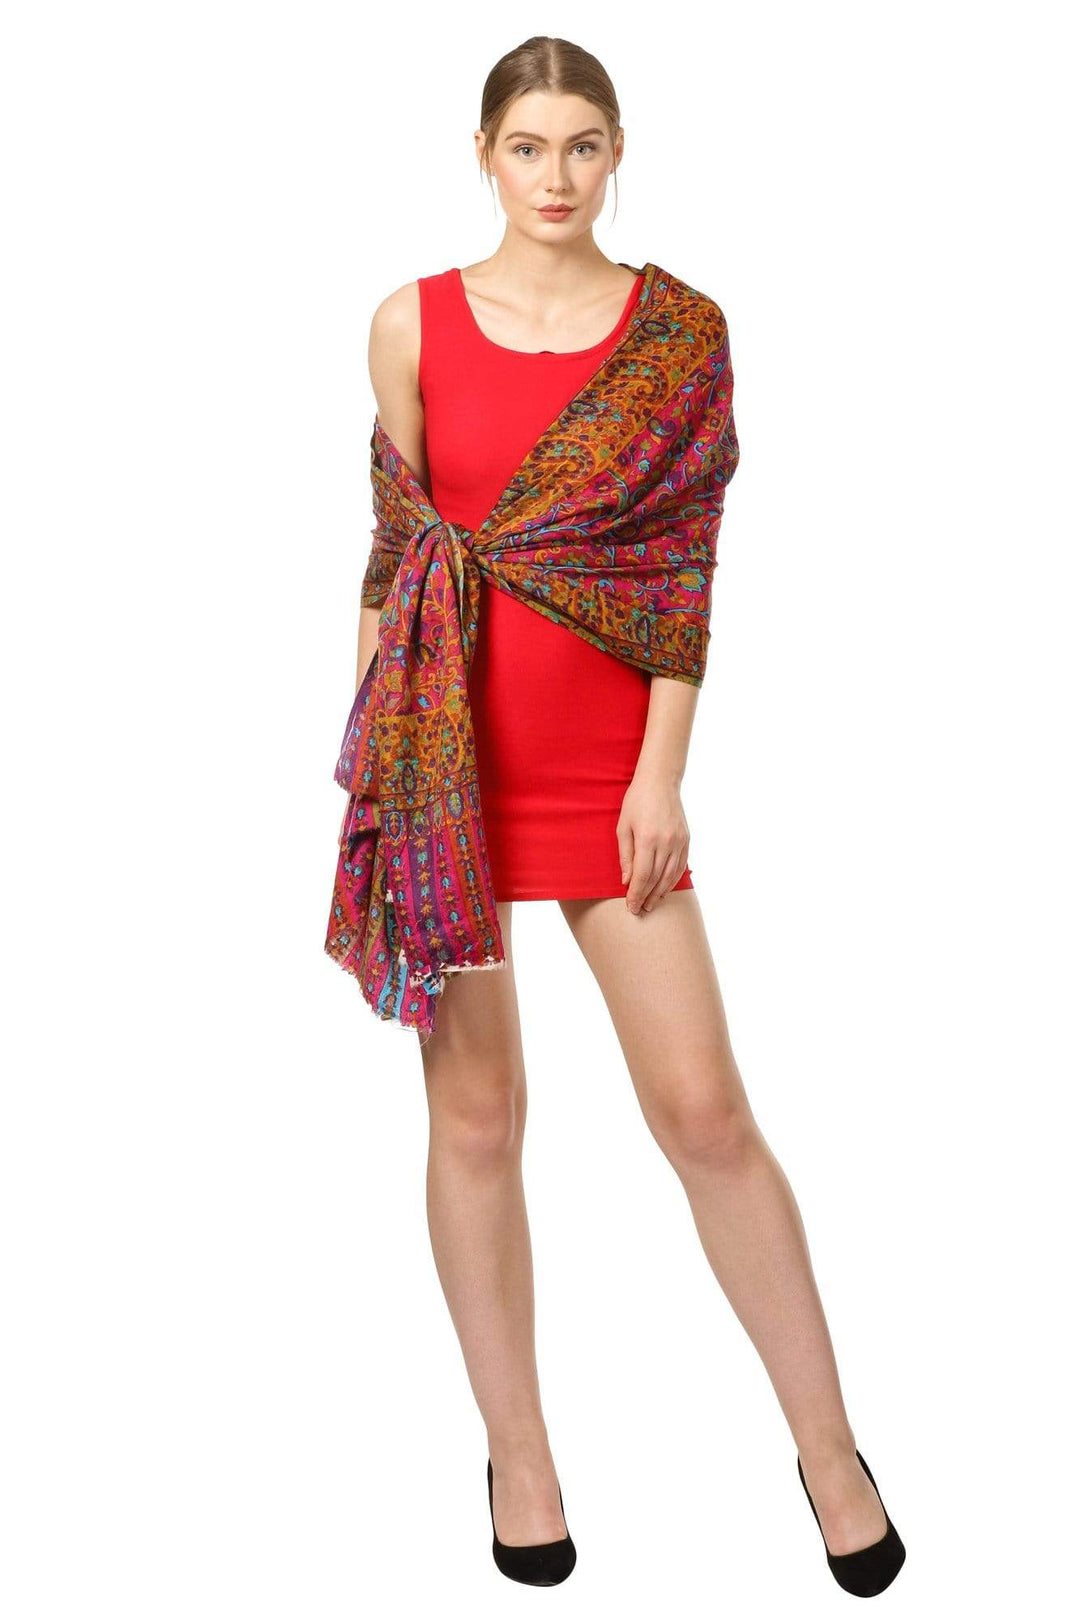 Pashtush Womens Fine Wool  Blended Printed Stole Scarf